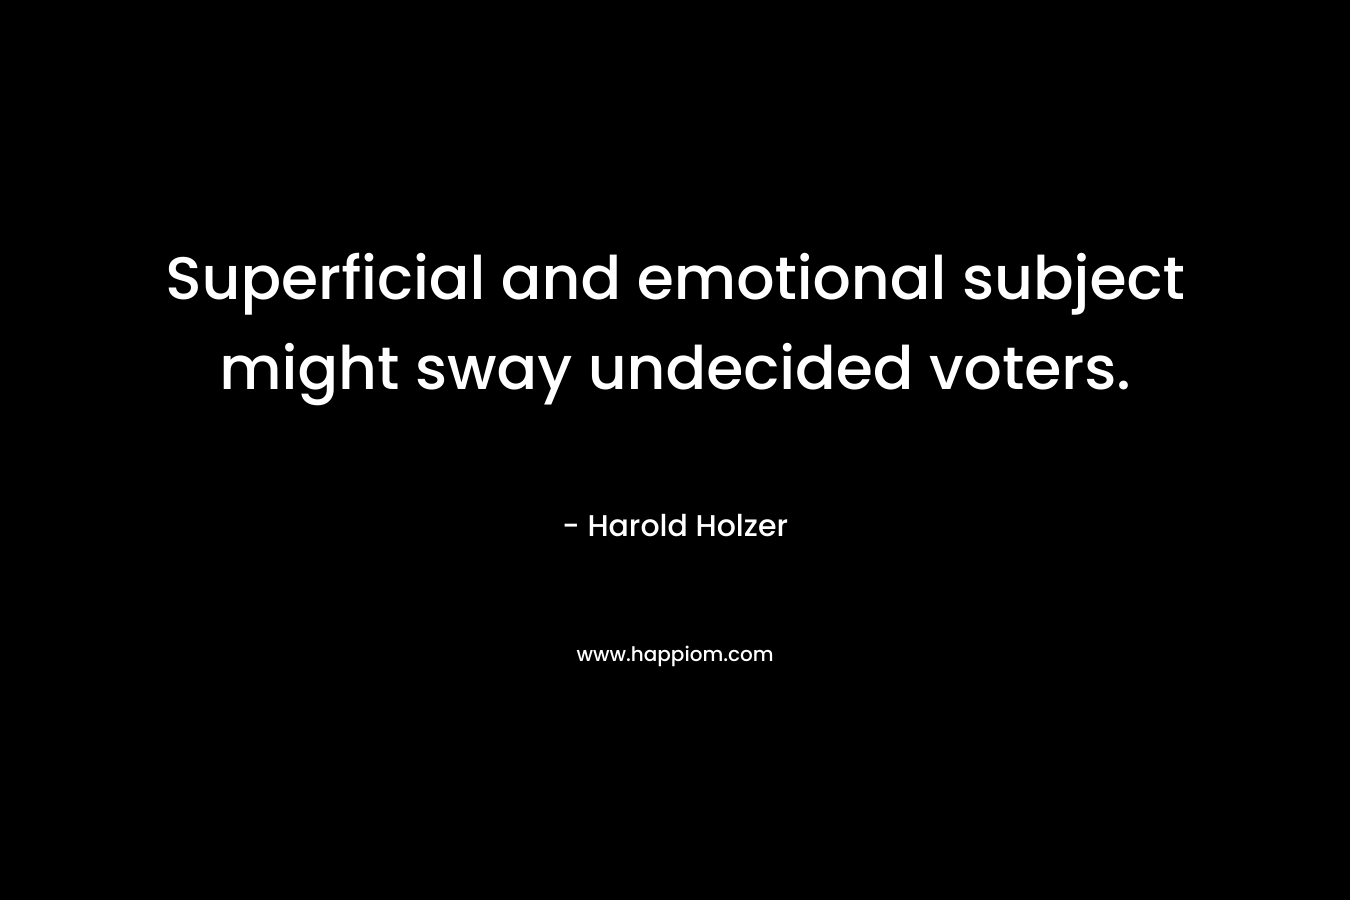 Superficial and emotional subject might sway undecided voters. – Harold Holzer